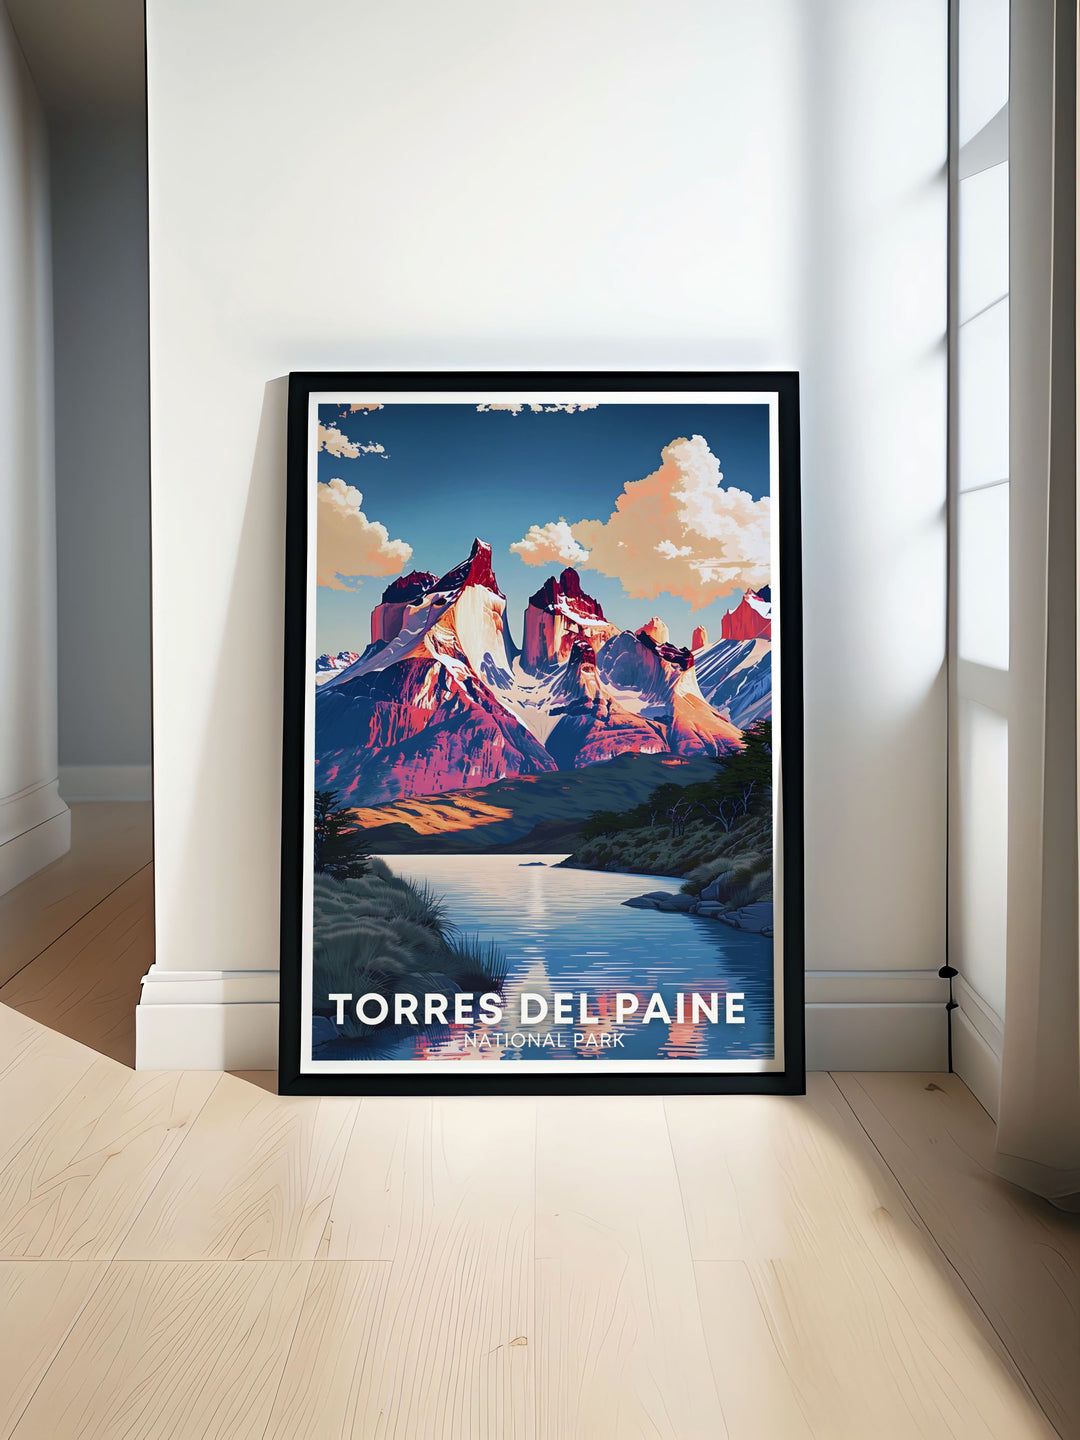 Torres del Paine National Park poster showcasing the majestic Cuernos del Paine in Patagonia Chile perfect for home decor or travel enthusiasts. This vintage print captures the essence of South American landscapes and wildlife featuring stunning guanacos against dramatic mountains.